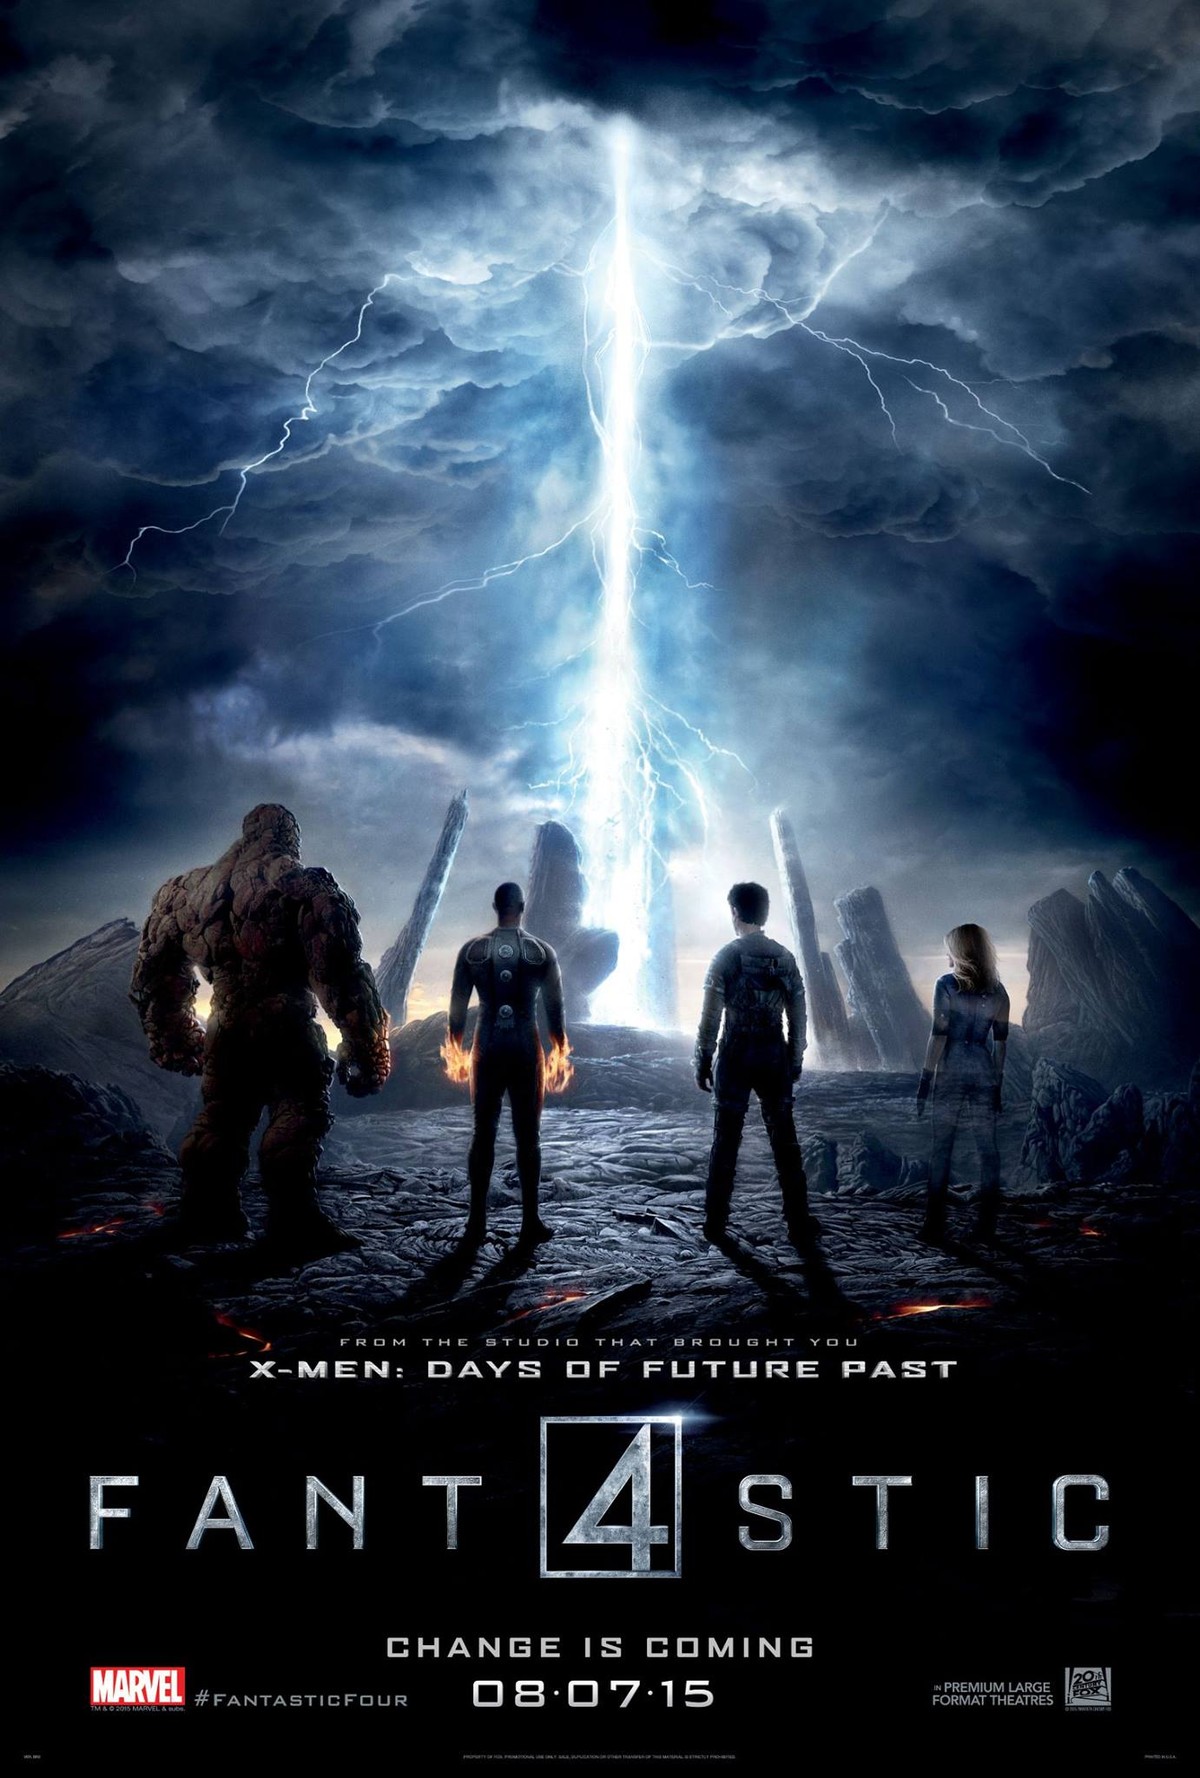 A New Poster For Trank’s FANTASTIC FOUR!!